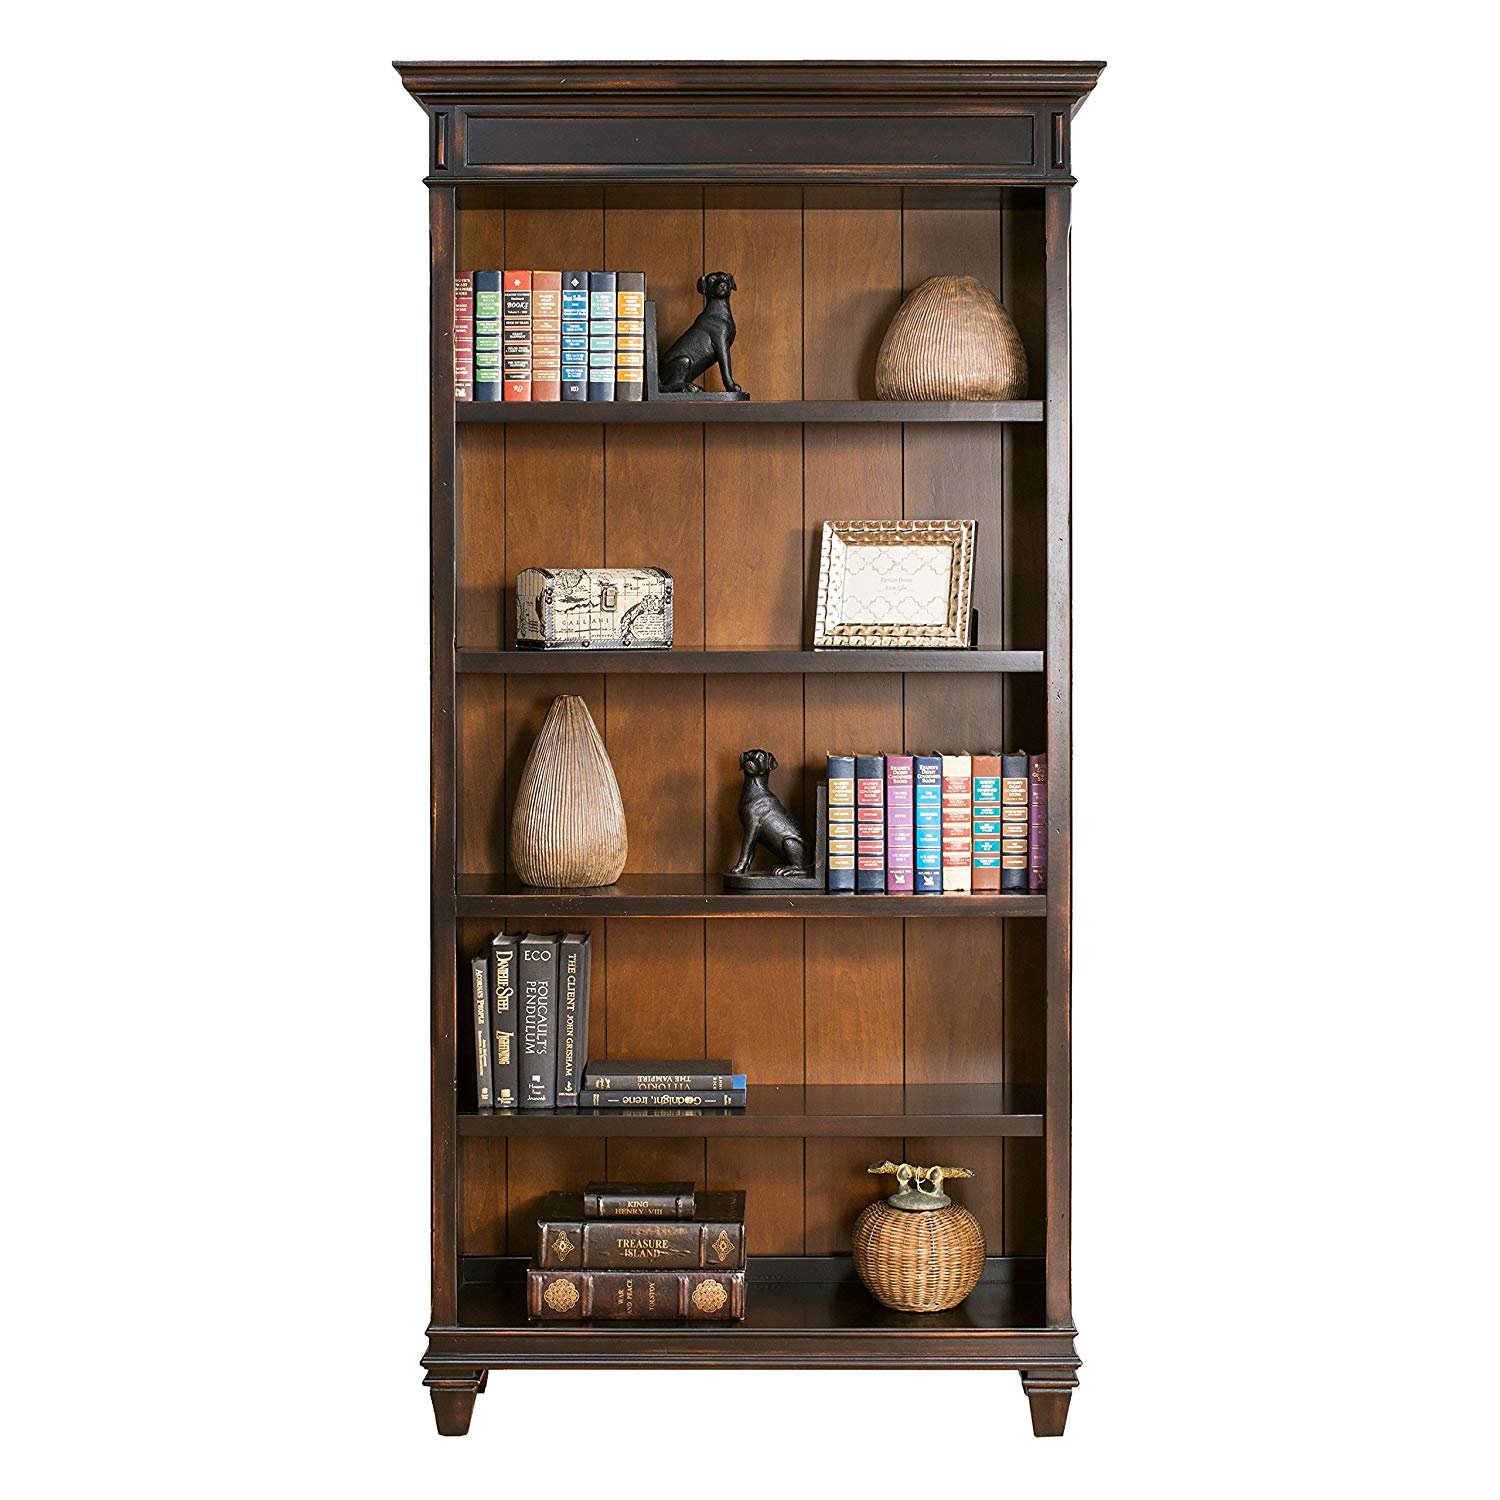 martin furniture hartford bookcase brown fully accent table assembled kitchen dining antique oval end adjustable metal legs tablet usb trendy home decor best lamps iron nesting